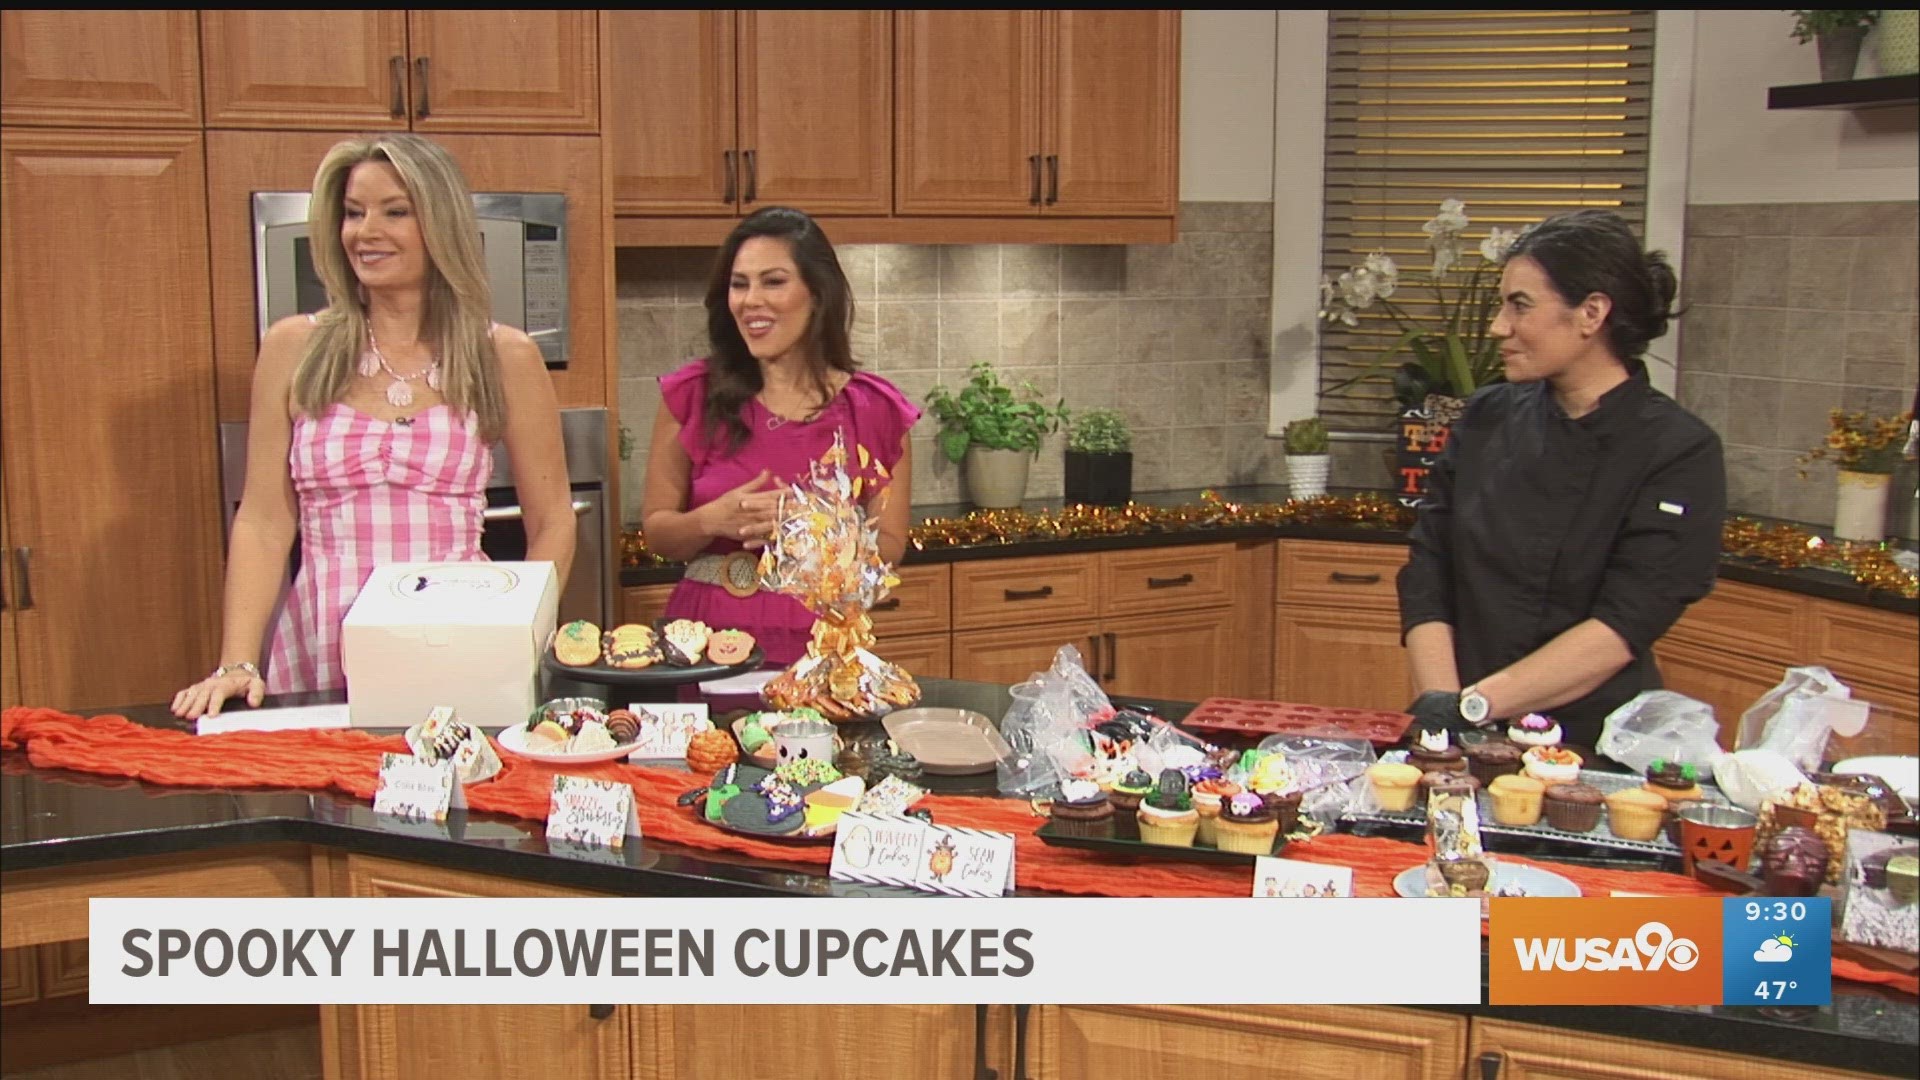 Penina Randolph of Pastries by Randolph shows Kristen and Elaine how to decorate Halloween Critter Cupcakes and other spooky treats.